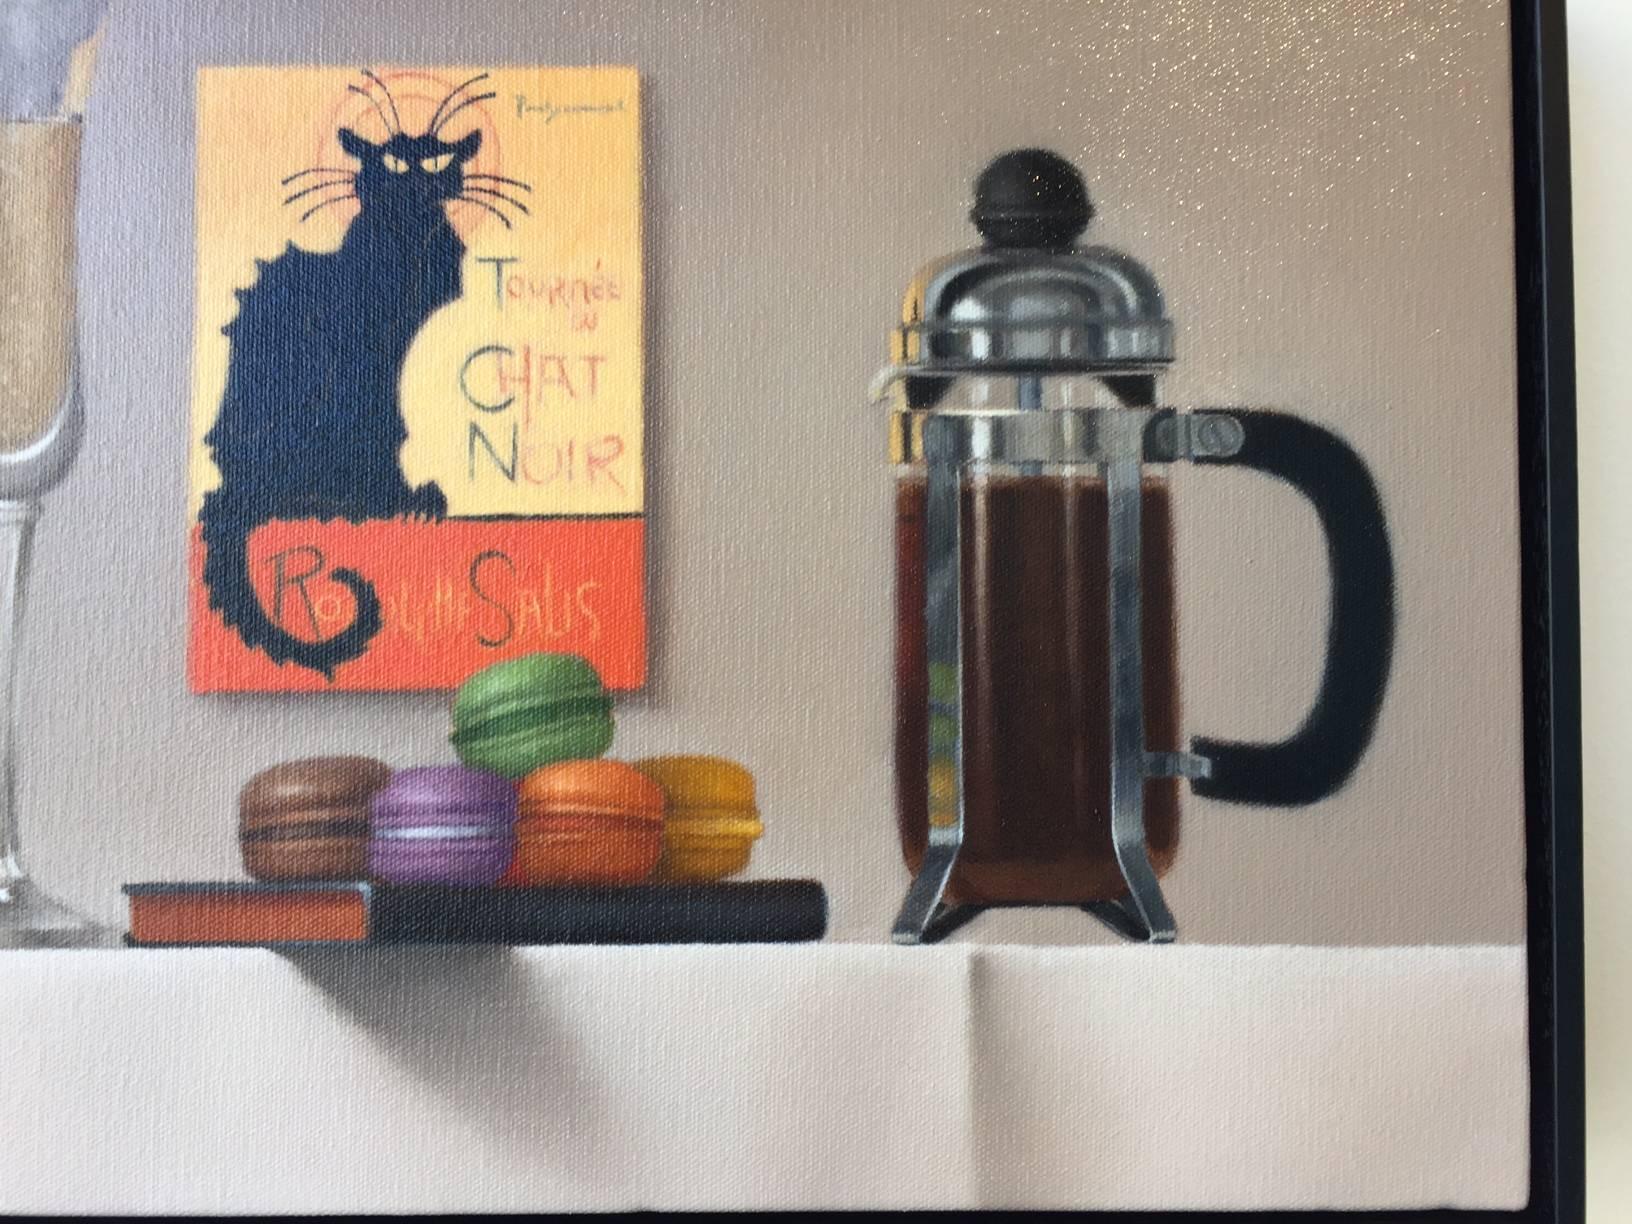 Flute of Champagne, French press coffee, tea tin, sweet macaron's and a classic Theophile-Alexandre Steinlen advertisement, are delightfully arranged in this sophisticated Mimi Jensen still life composition that is painted with oil on linen canvas.